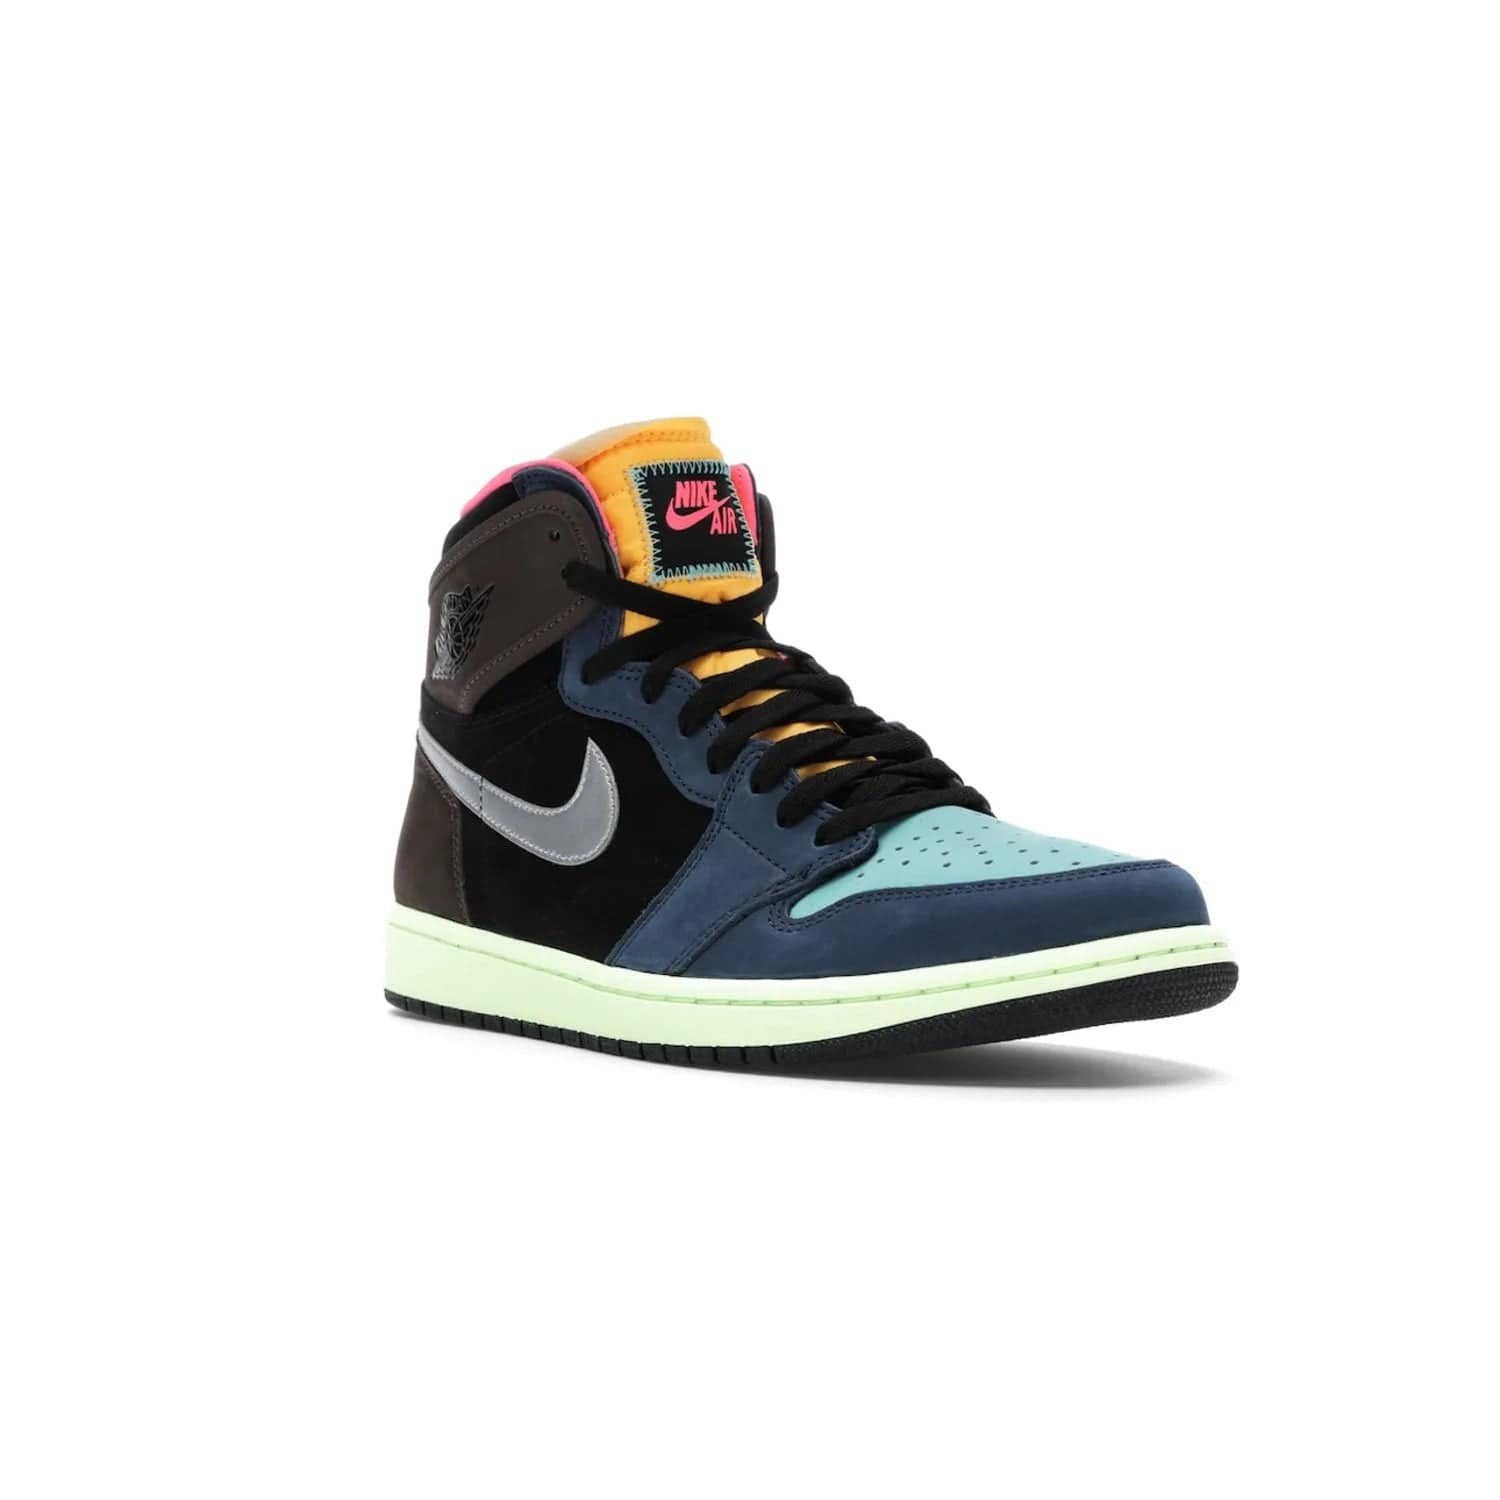 Jordan 1 Retro High Tokyo Bio Hack - Image 6 - Only at www.BallersClubKickz.com - Step up your sneaker game with the Air Jordan 1 Retro High Tokyo Bio Hack! Unique design featuring multiple materials and eye-catching colors. Metallic leather Swoosh and light green midsole for a stunning look. Available now for just $170.